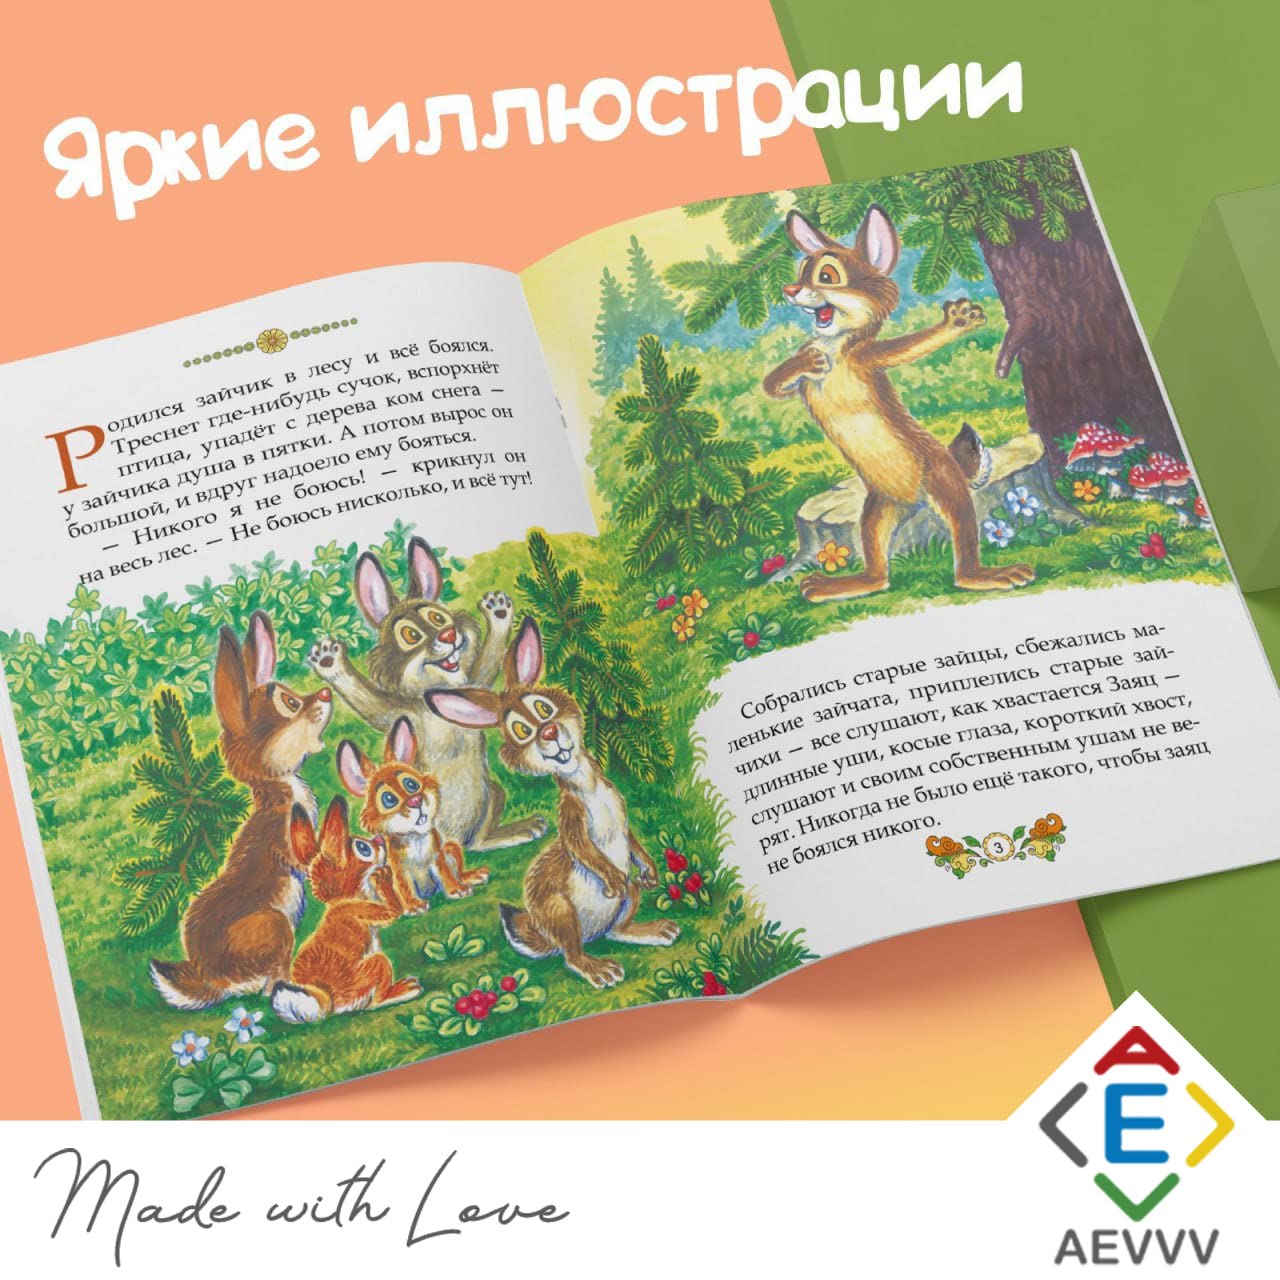 Set of 10 Russian Fairy Tales Books - Collection of Russian Folk Tales for Kids - Русские Народные Сказки - Russkie Skazki - Книги На Русском Языке